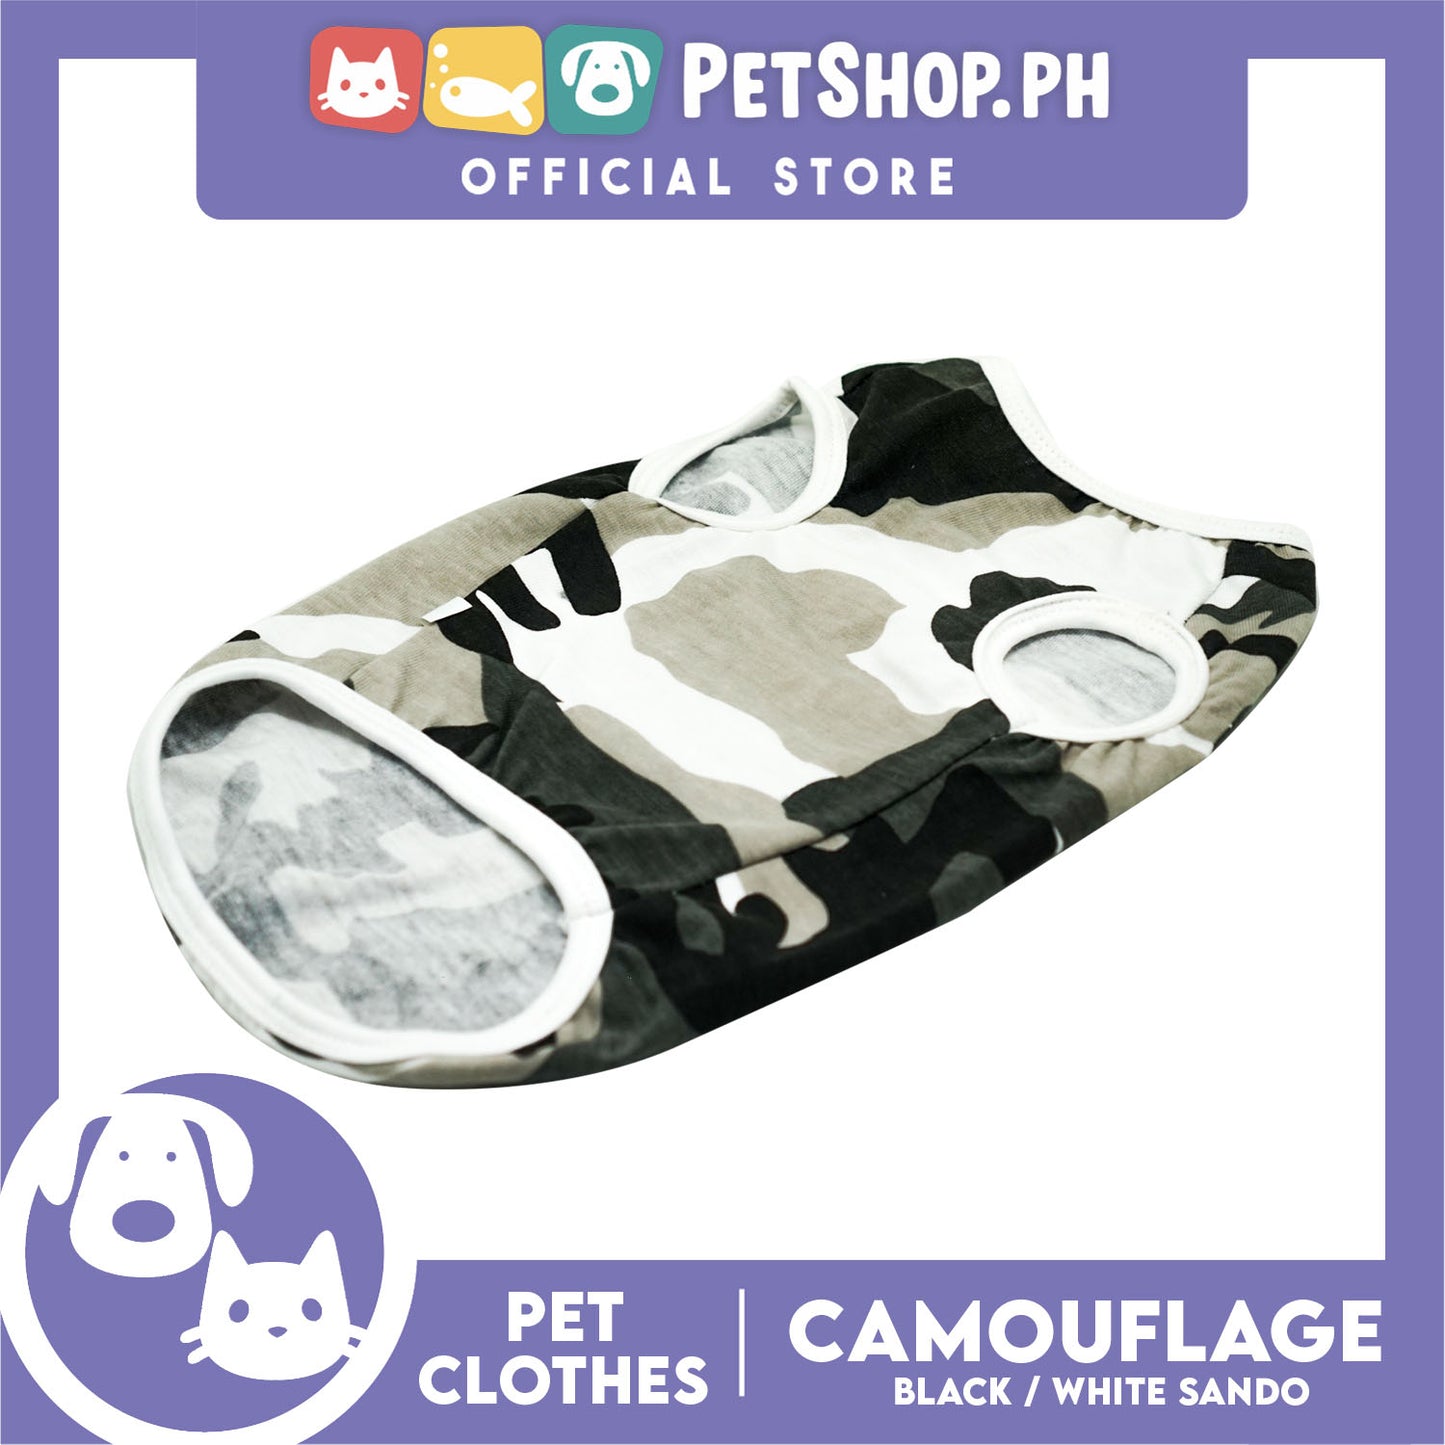 Pet Shirt Camouflage Black and White Sando (XL) Perfect Shirt for Male Dogs and Cats